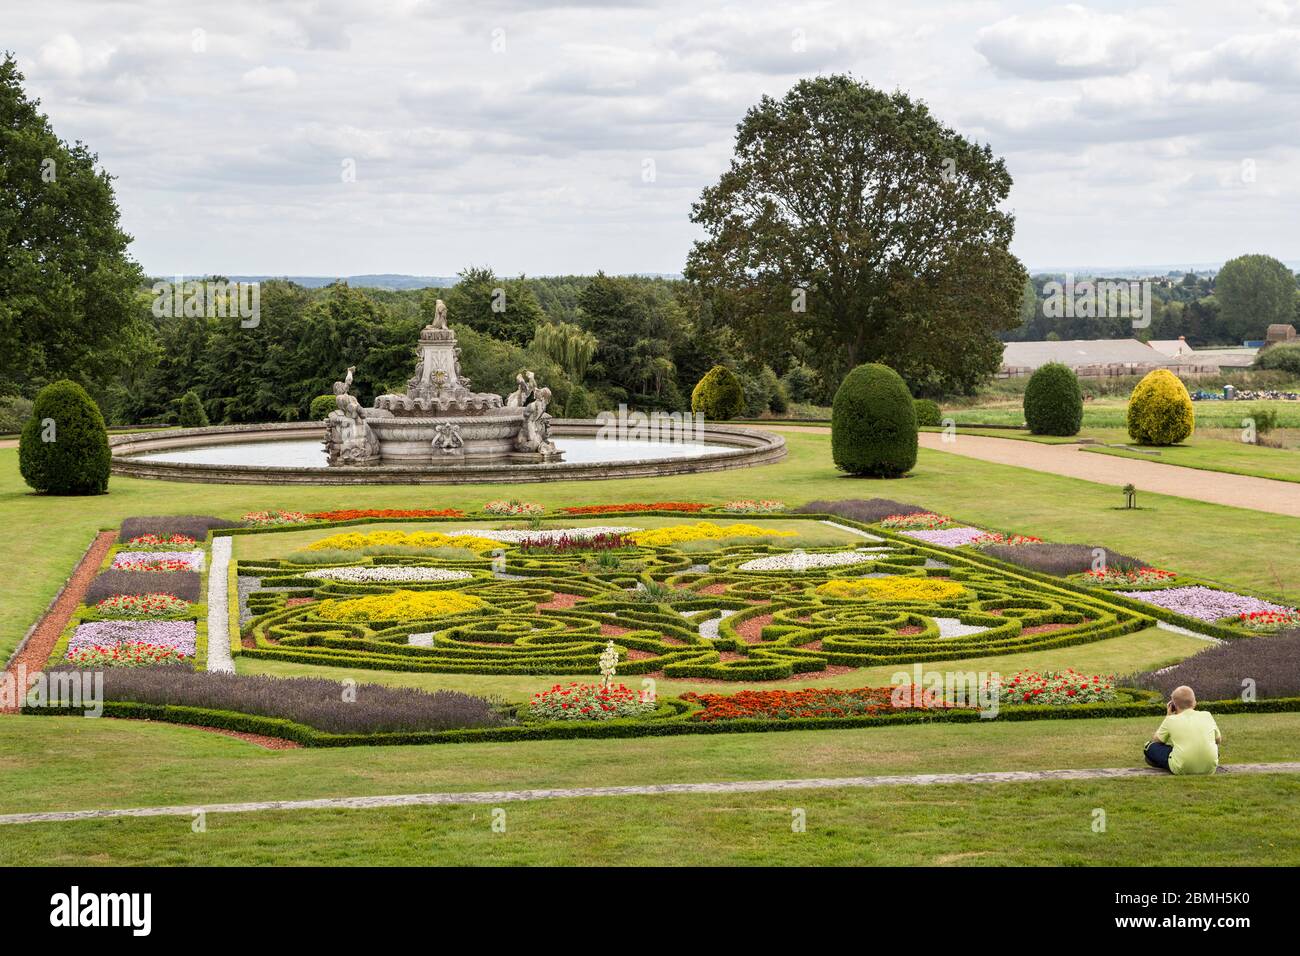 Jardins officiels, Witley court, Worcestershire, Angleterre, Royaume-Uni Banque D'Images